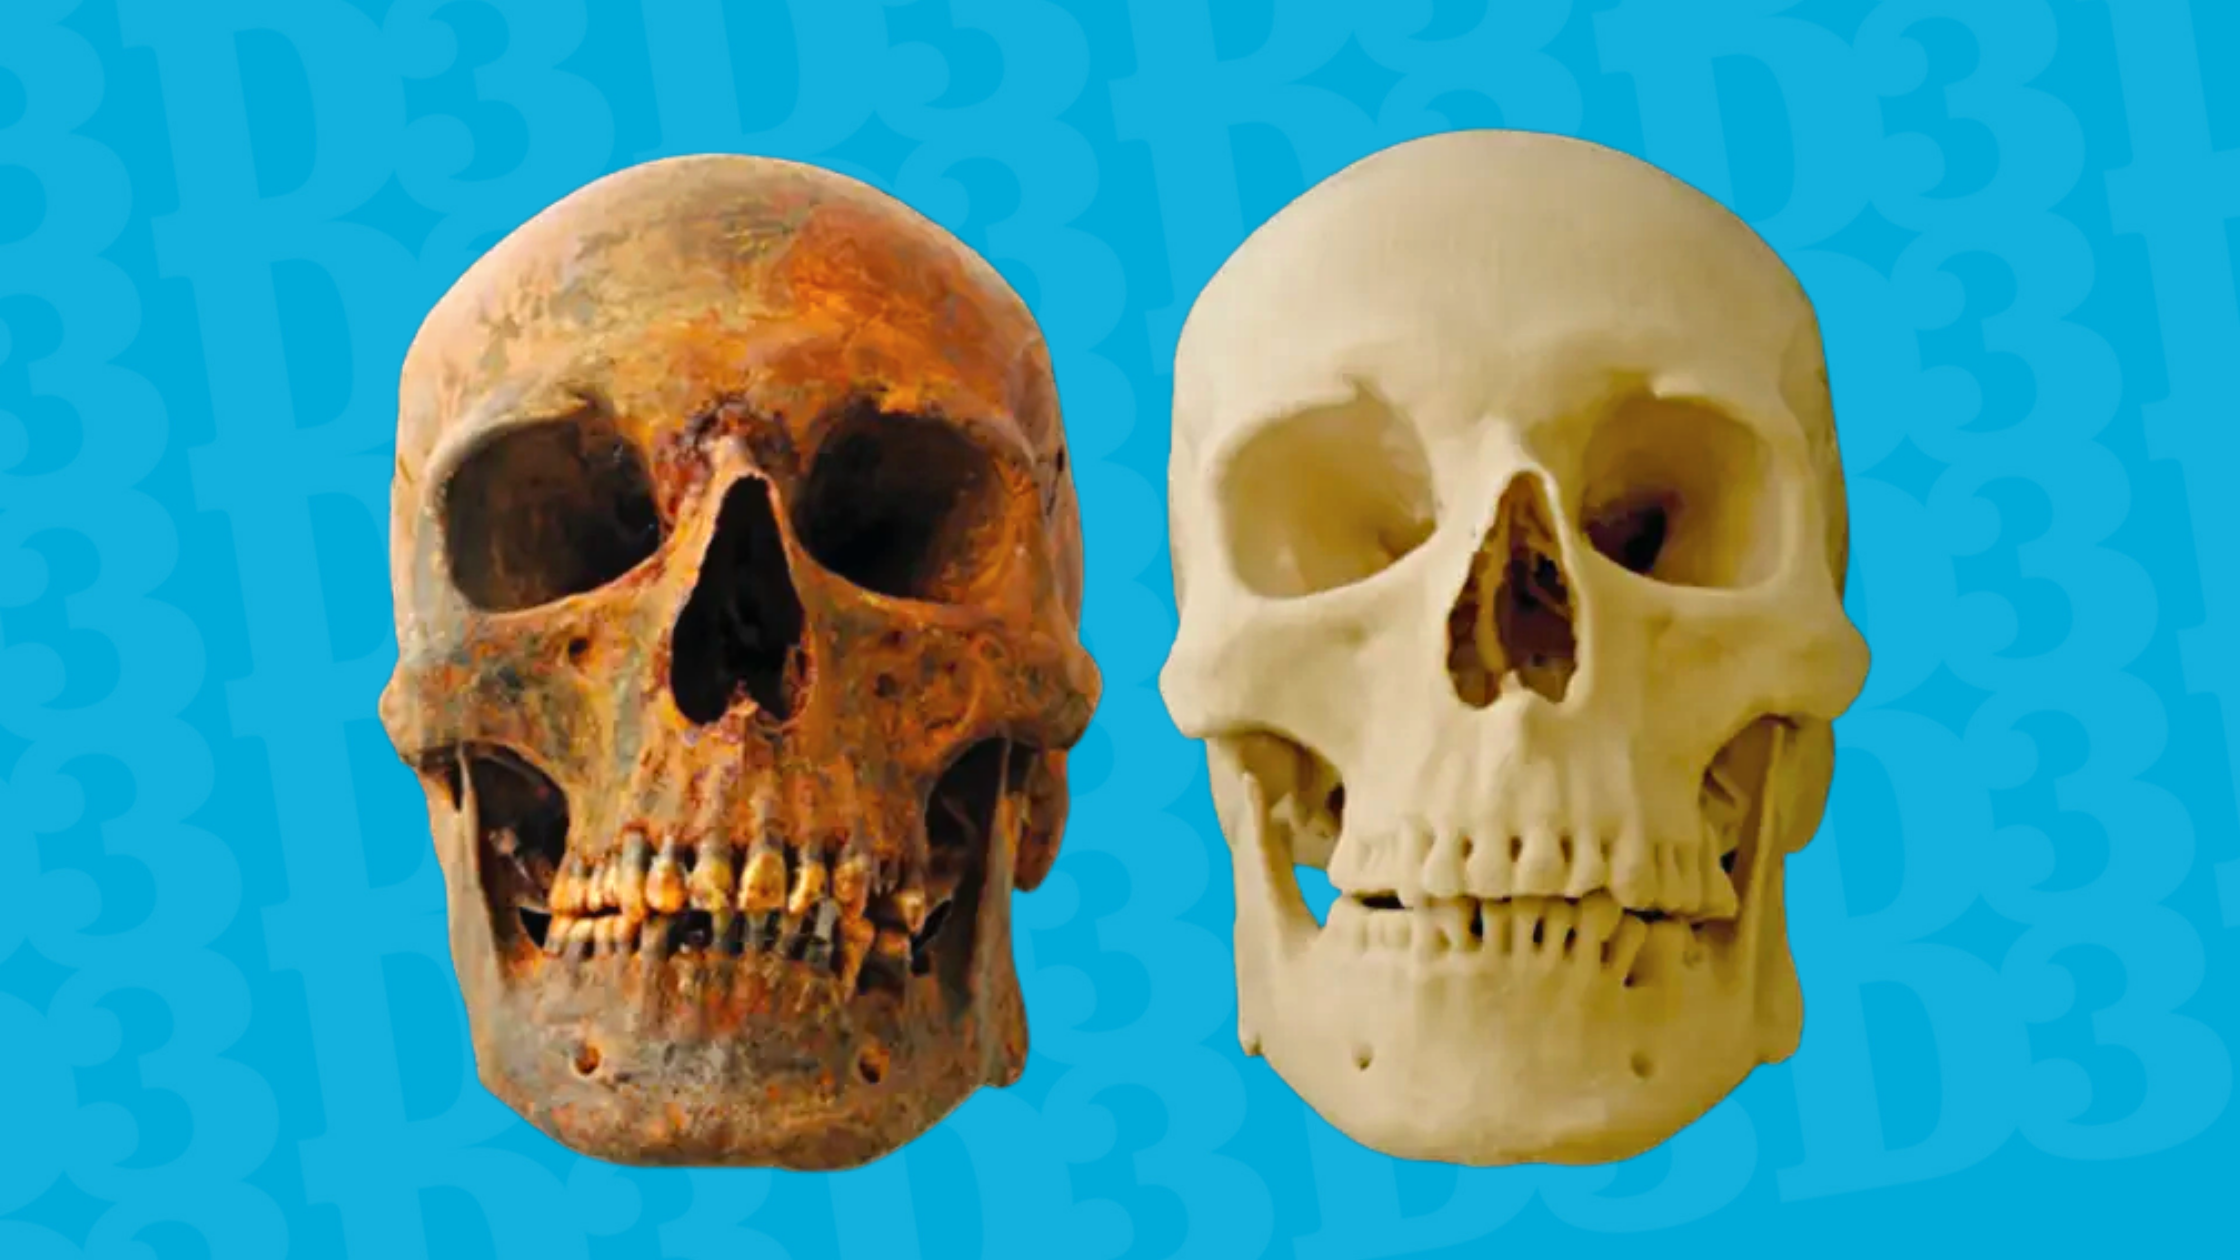 Real human skull next to its 3D printed replica.